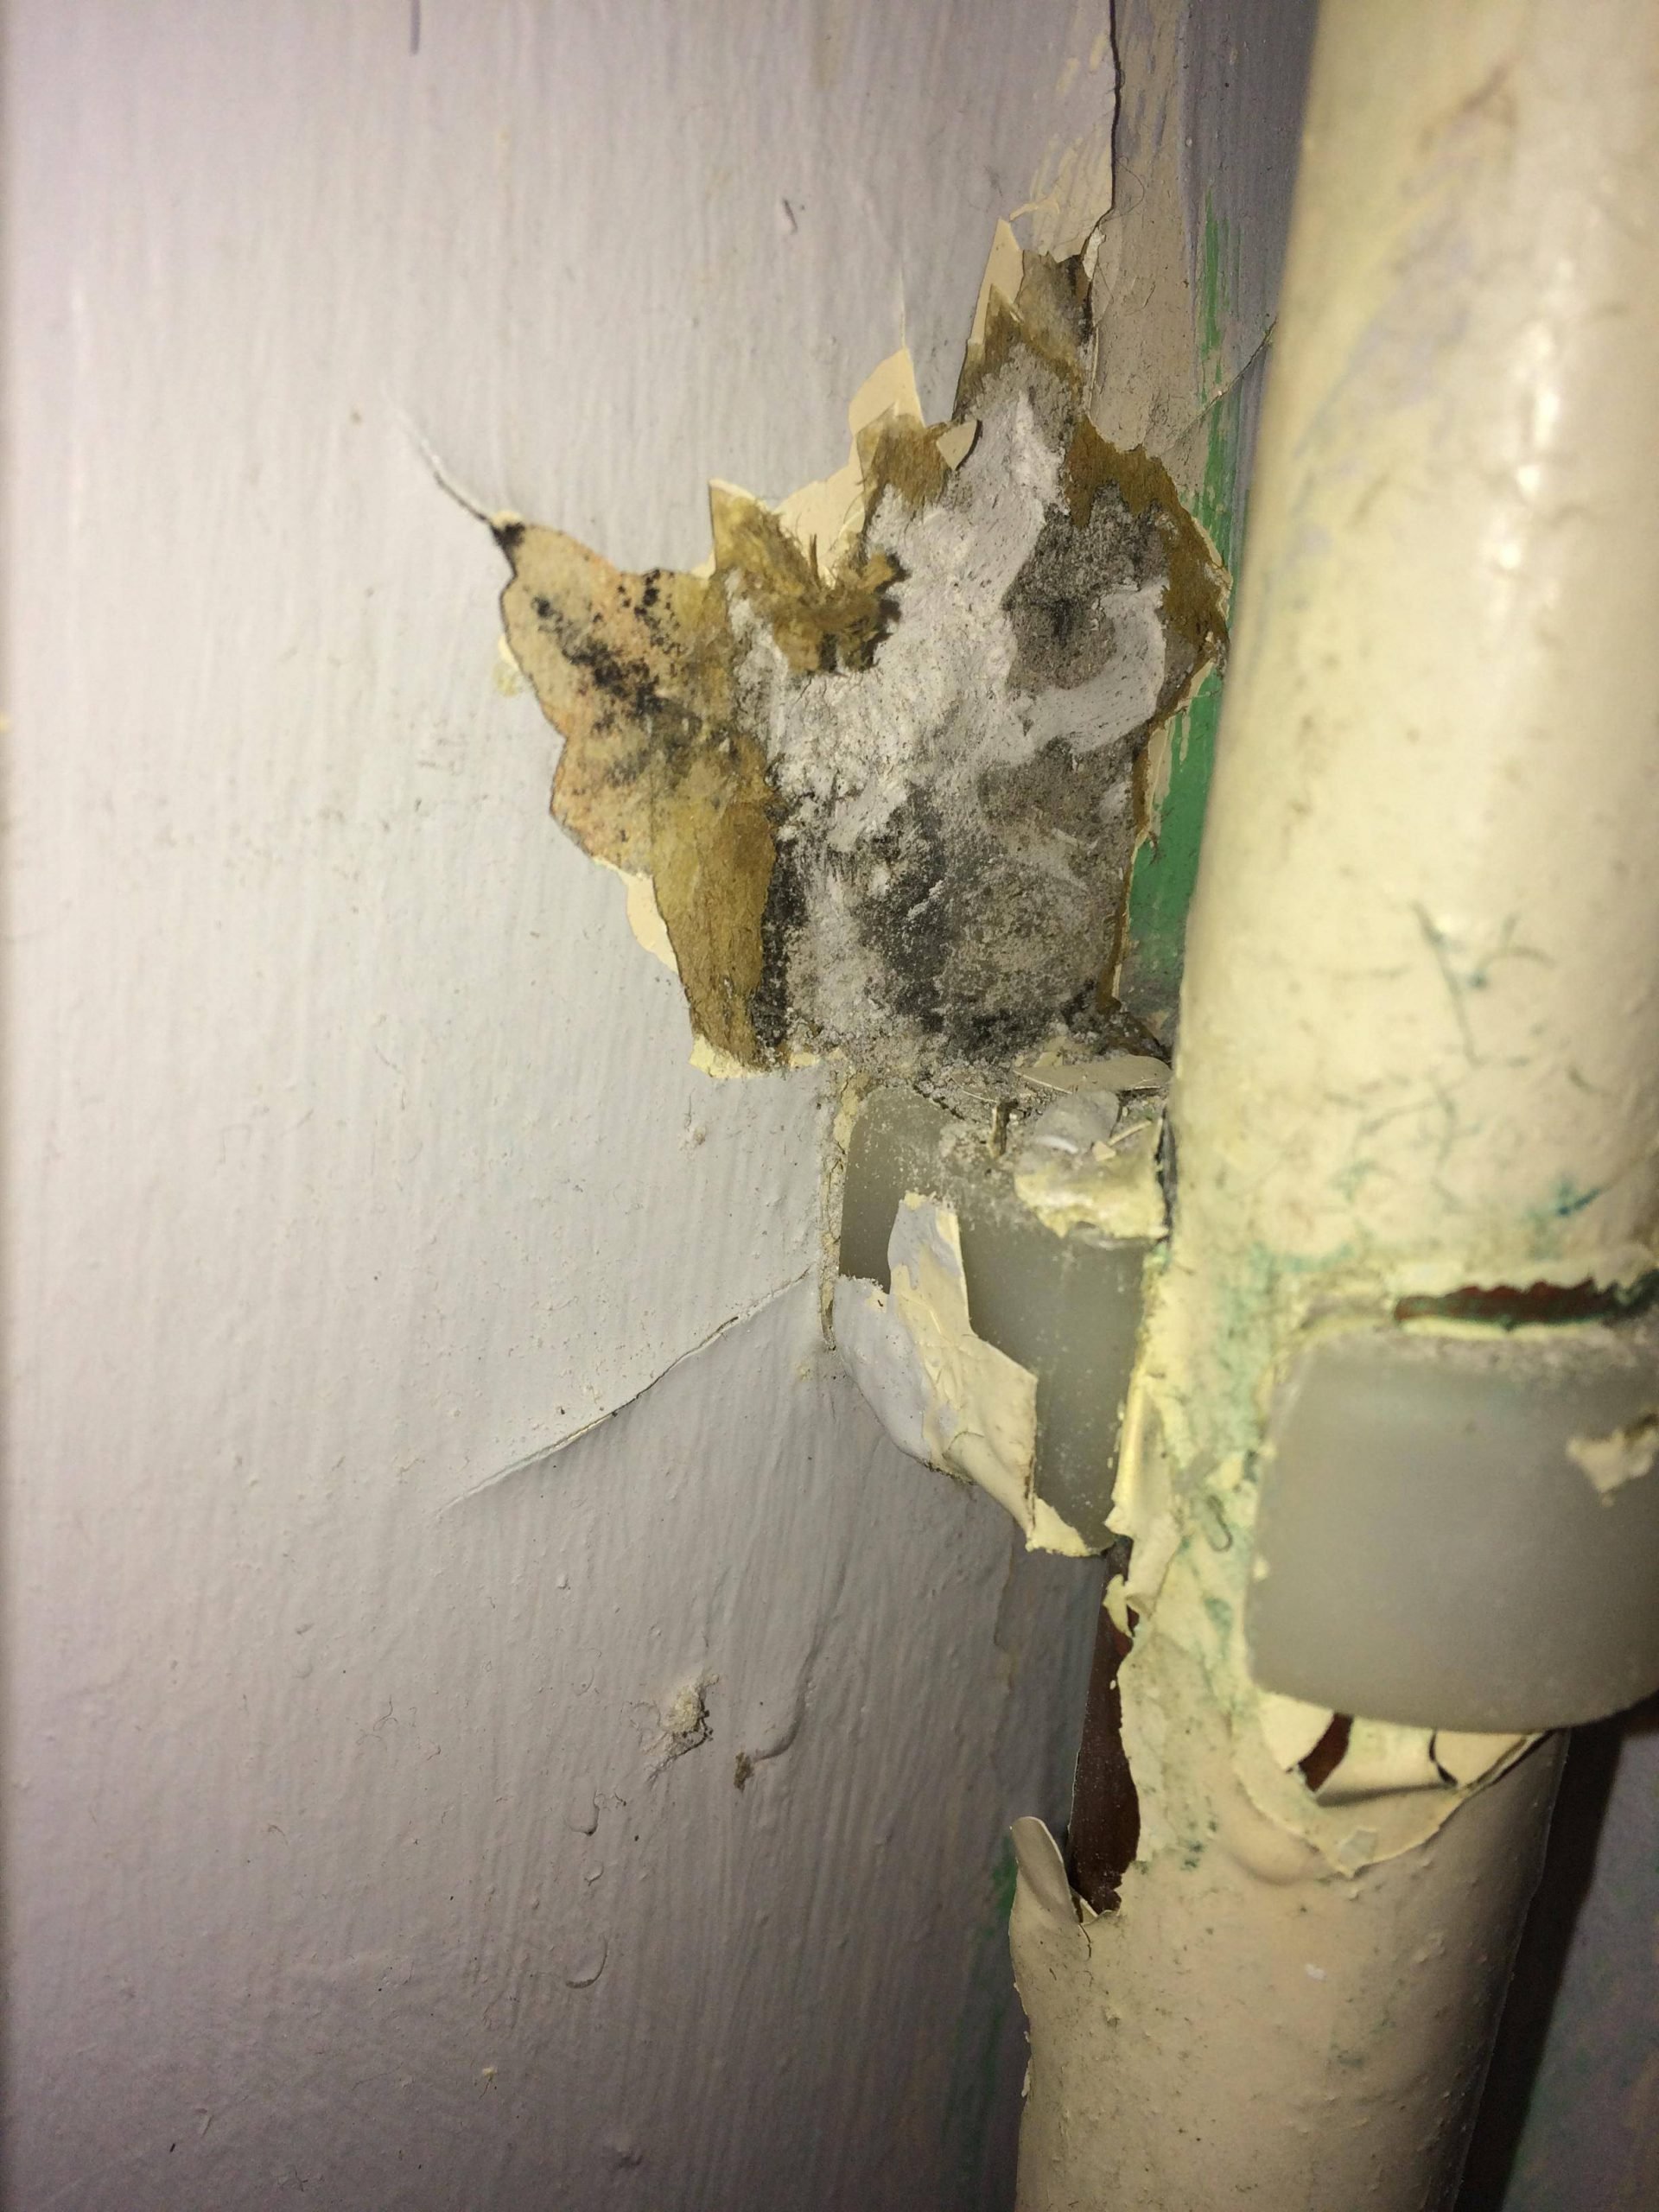 Do these pictures suggest mold is growing behind walls?